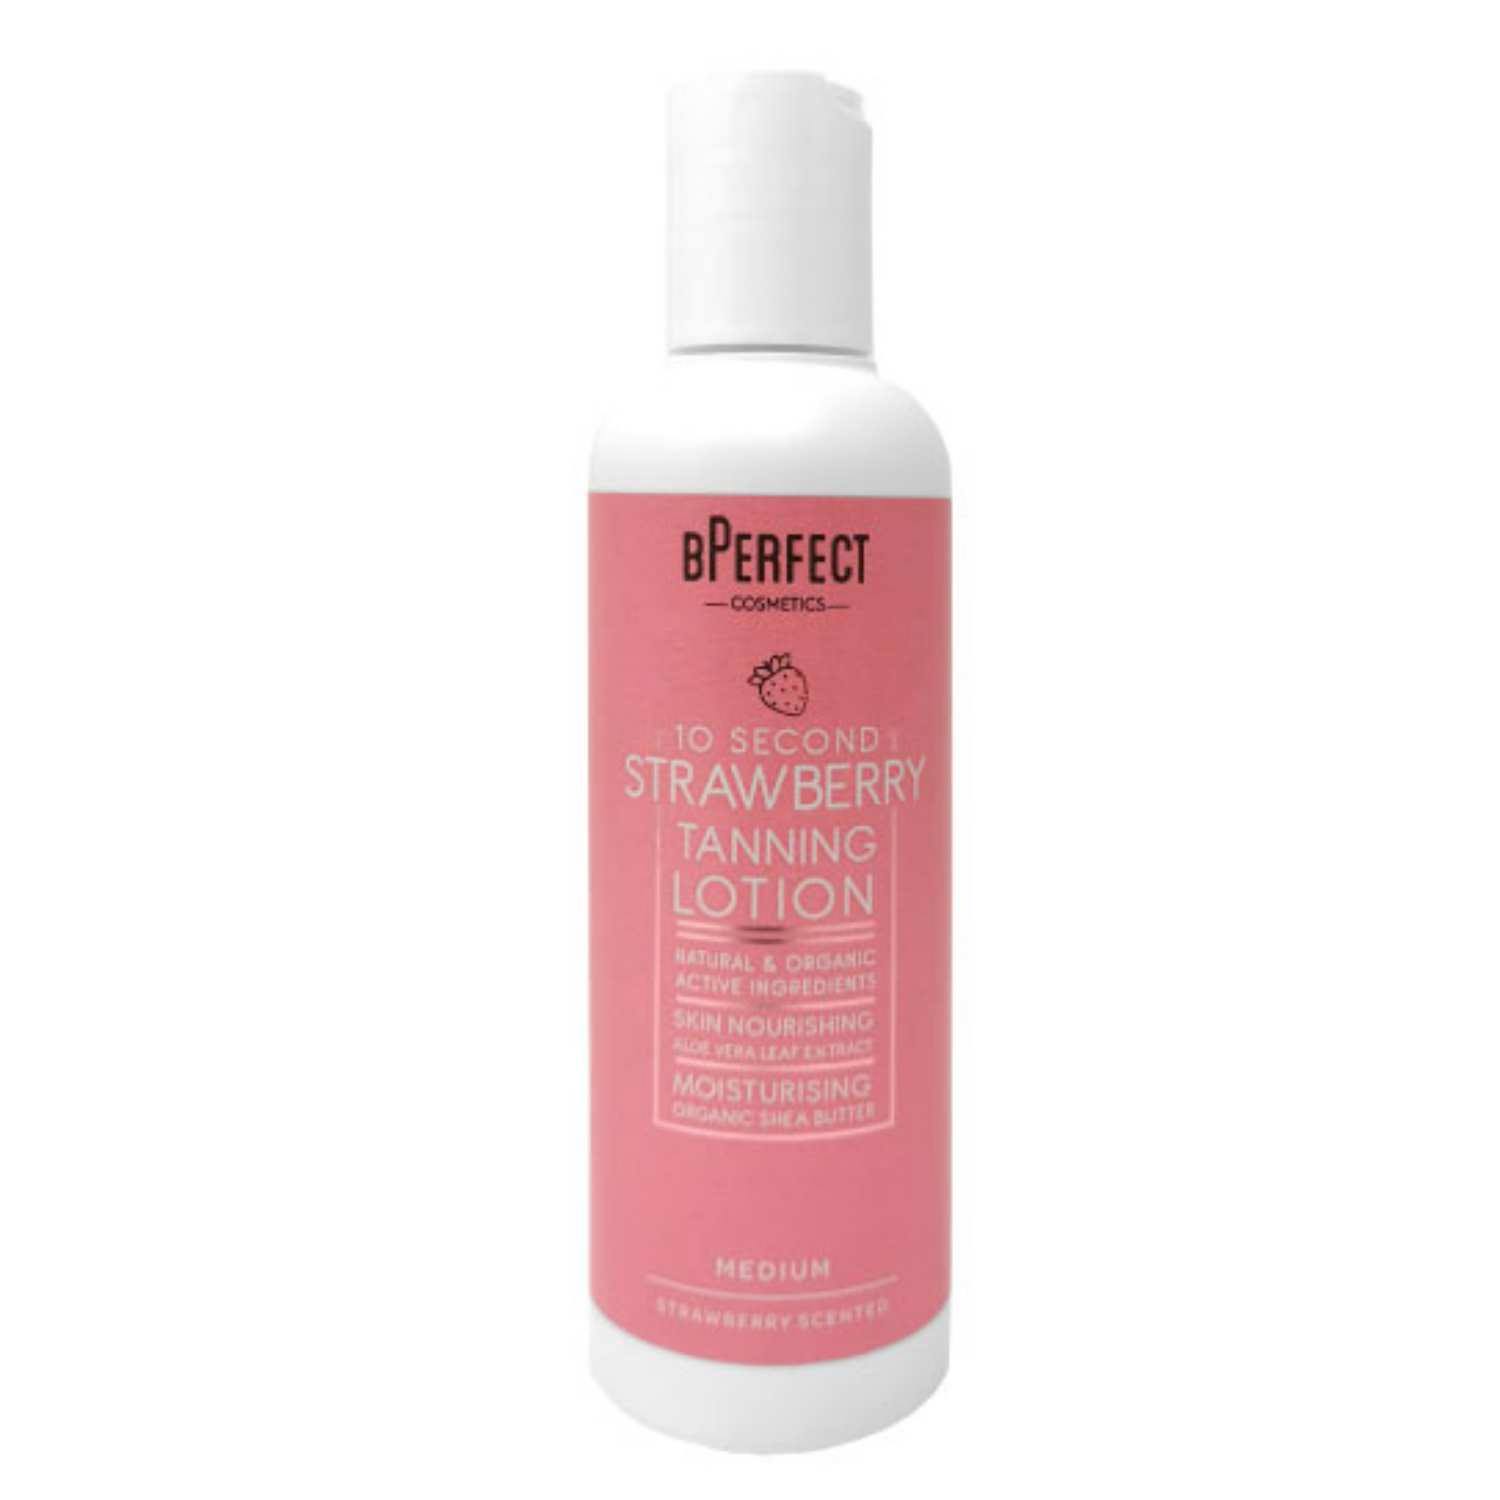 BPerfect 10 Second Strawberry Self Tanning Lotion in Medium